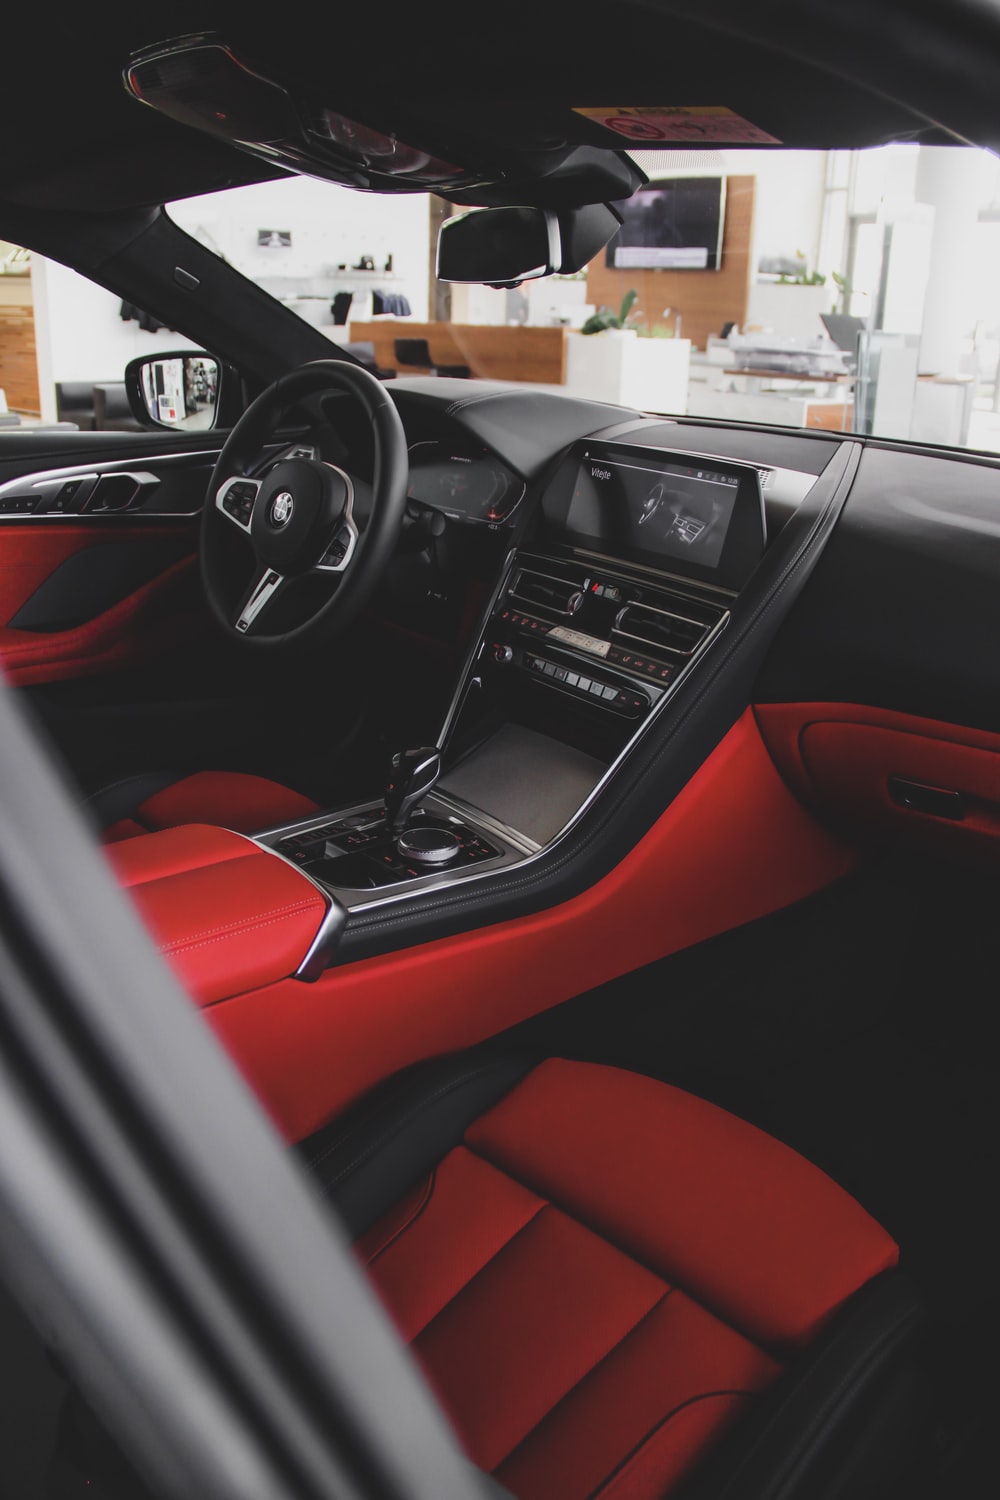 Car Interior Picture. Download Free Image